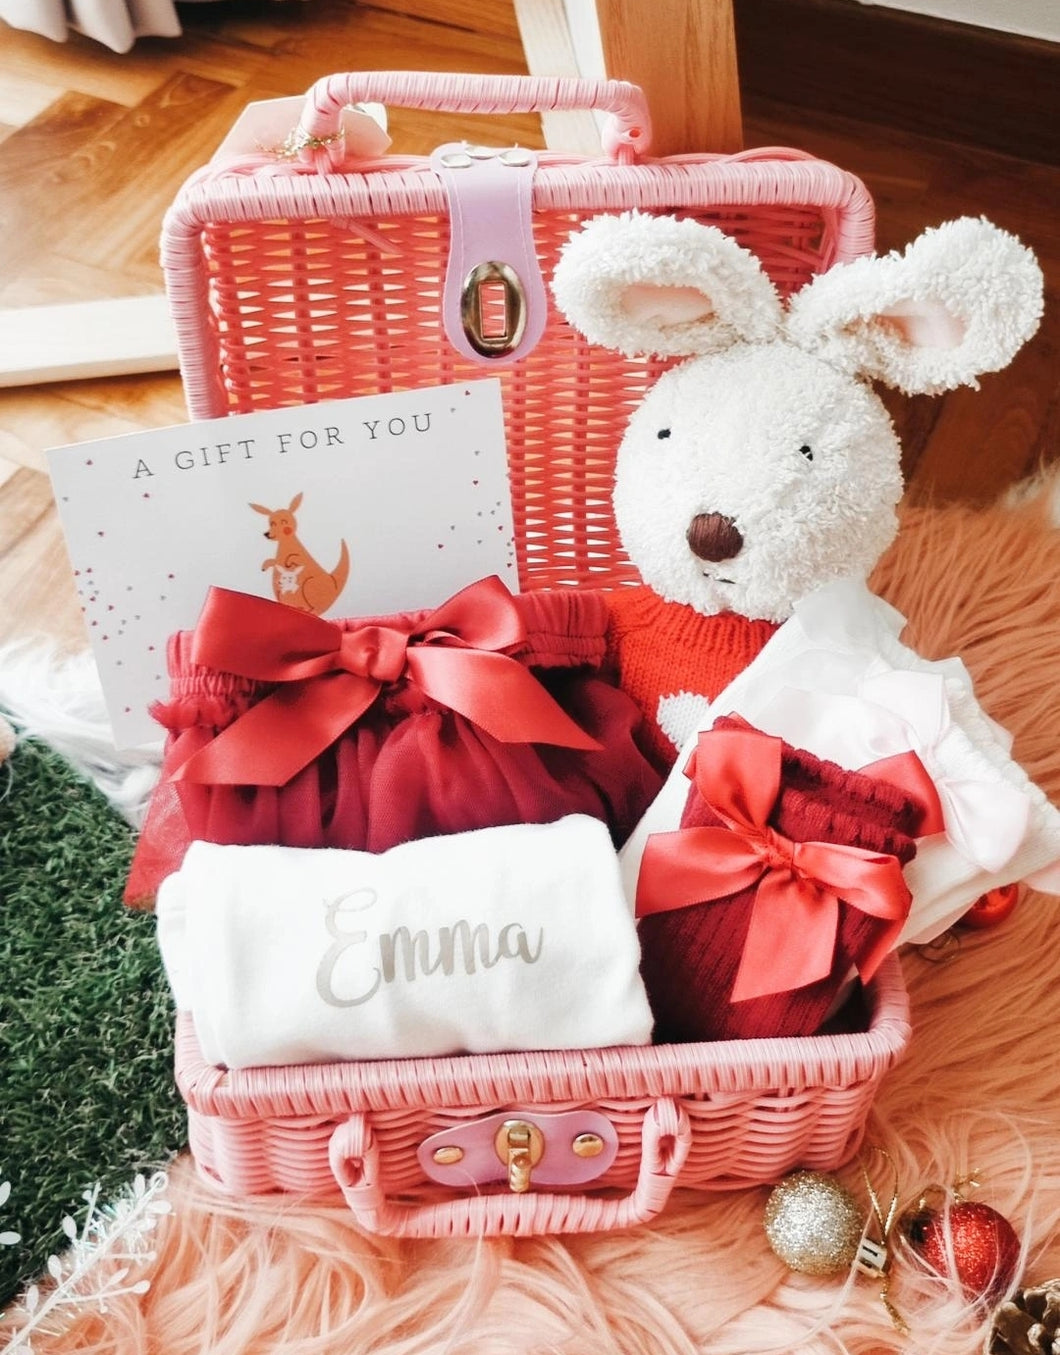 My Sweet Baby Girl Personalized Gift Set